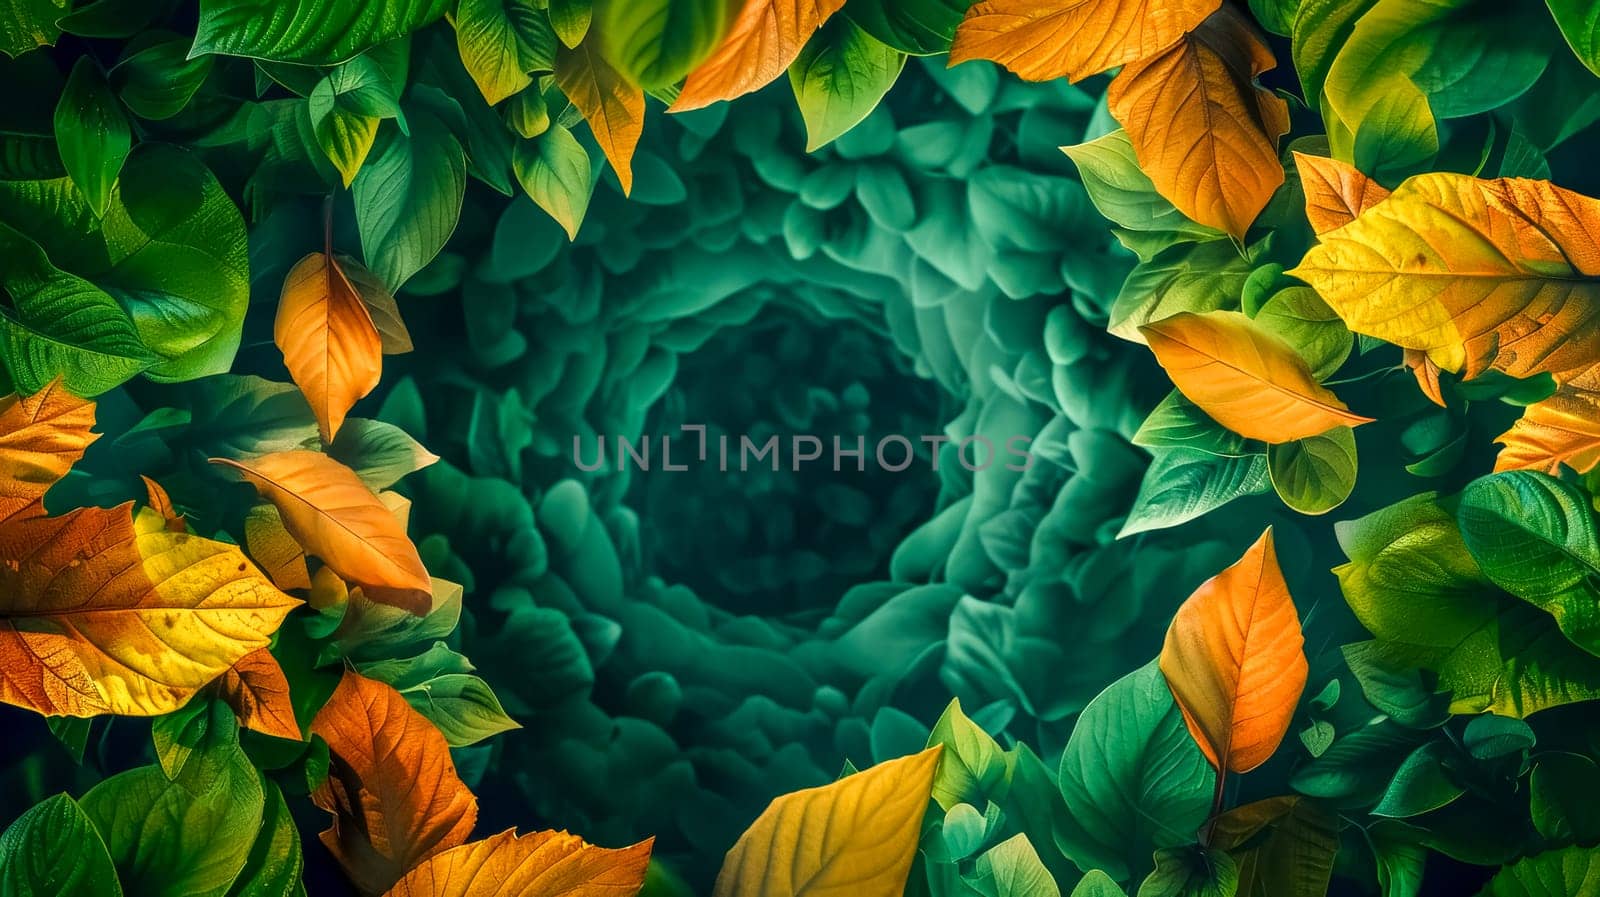 Magical tunnel vision created by lush foliage with vibrant autumnal leaves